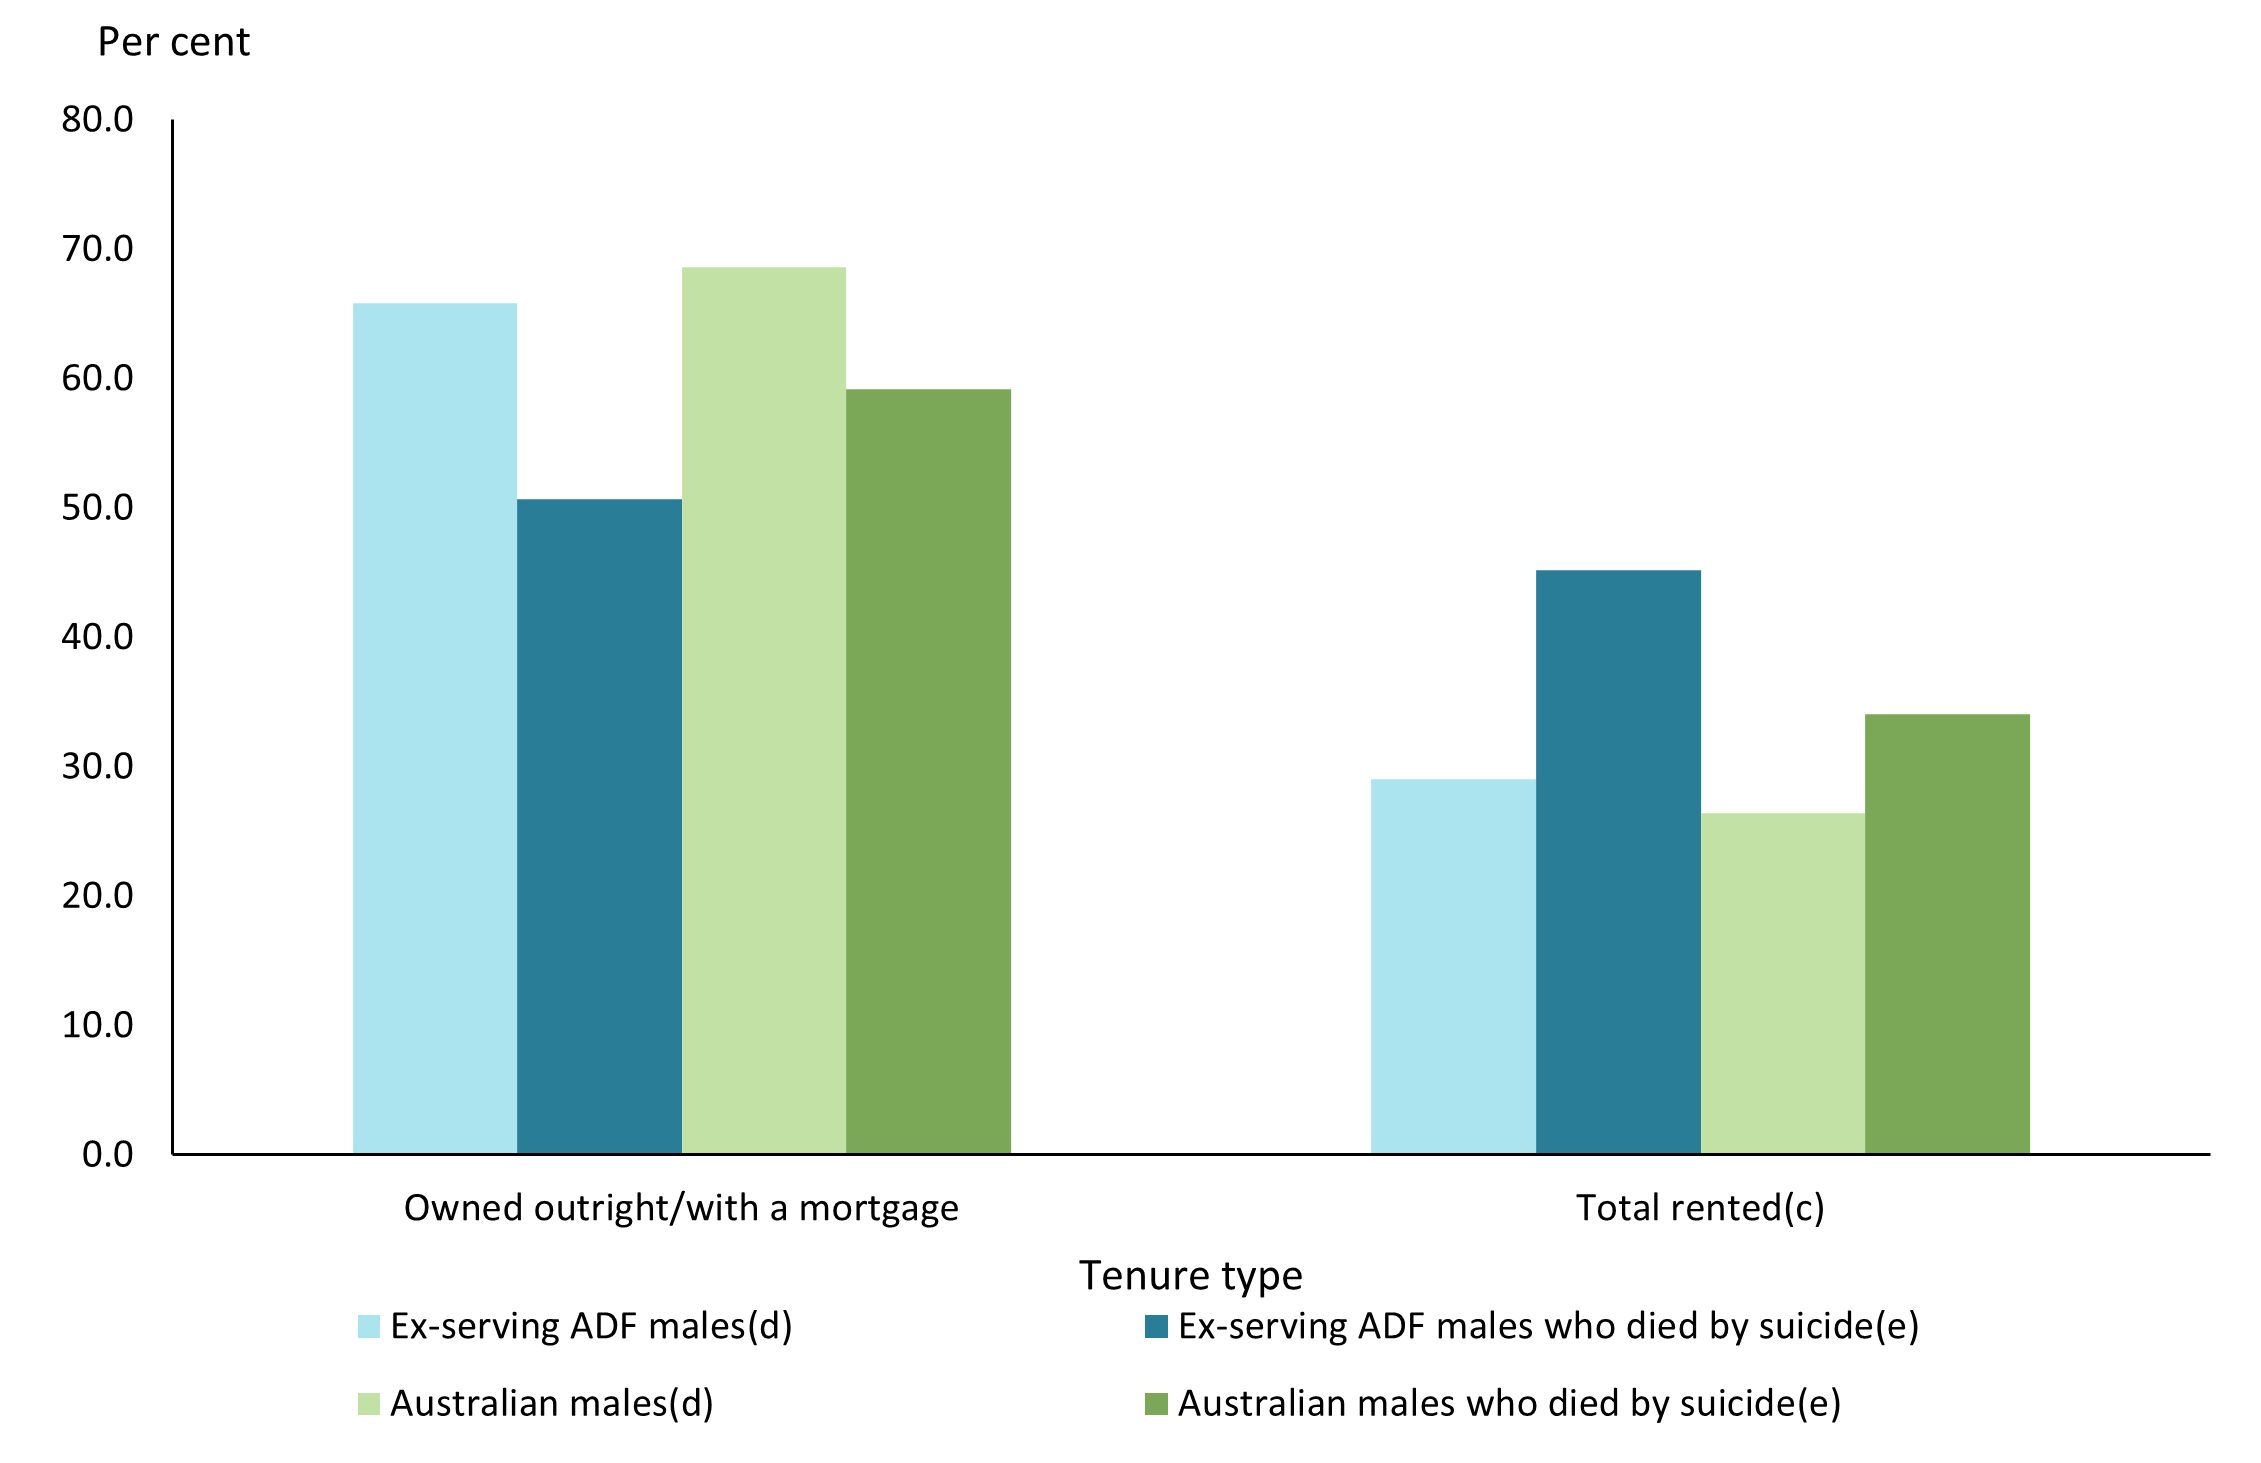 The bar chart shows that ex-serving ADF males who died by suicide were more likely to live in an owned private dwelling.